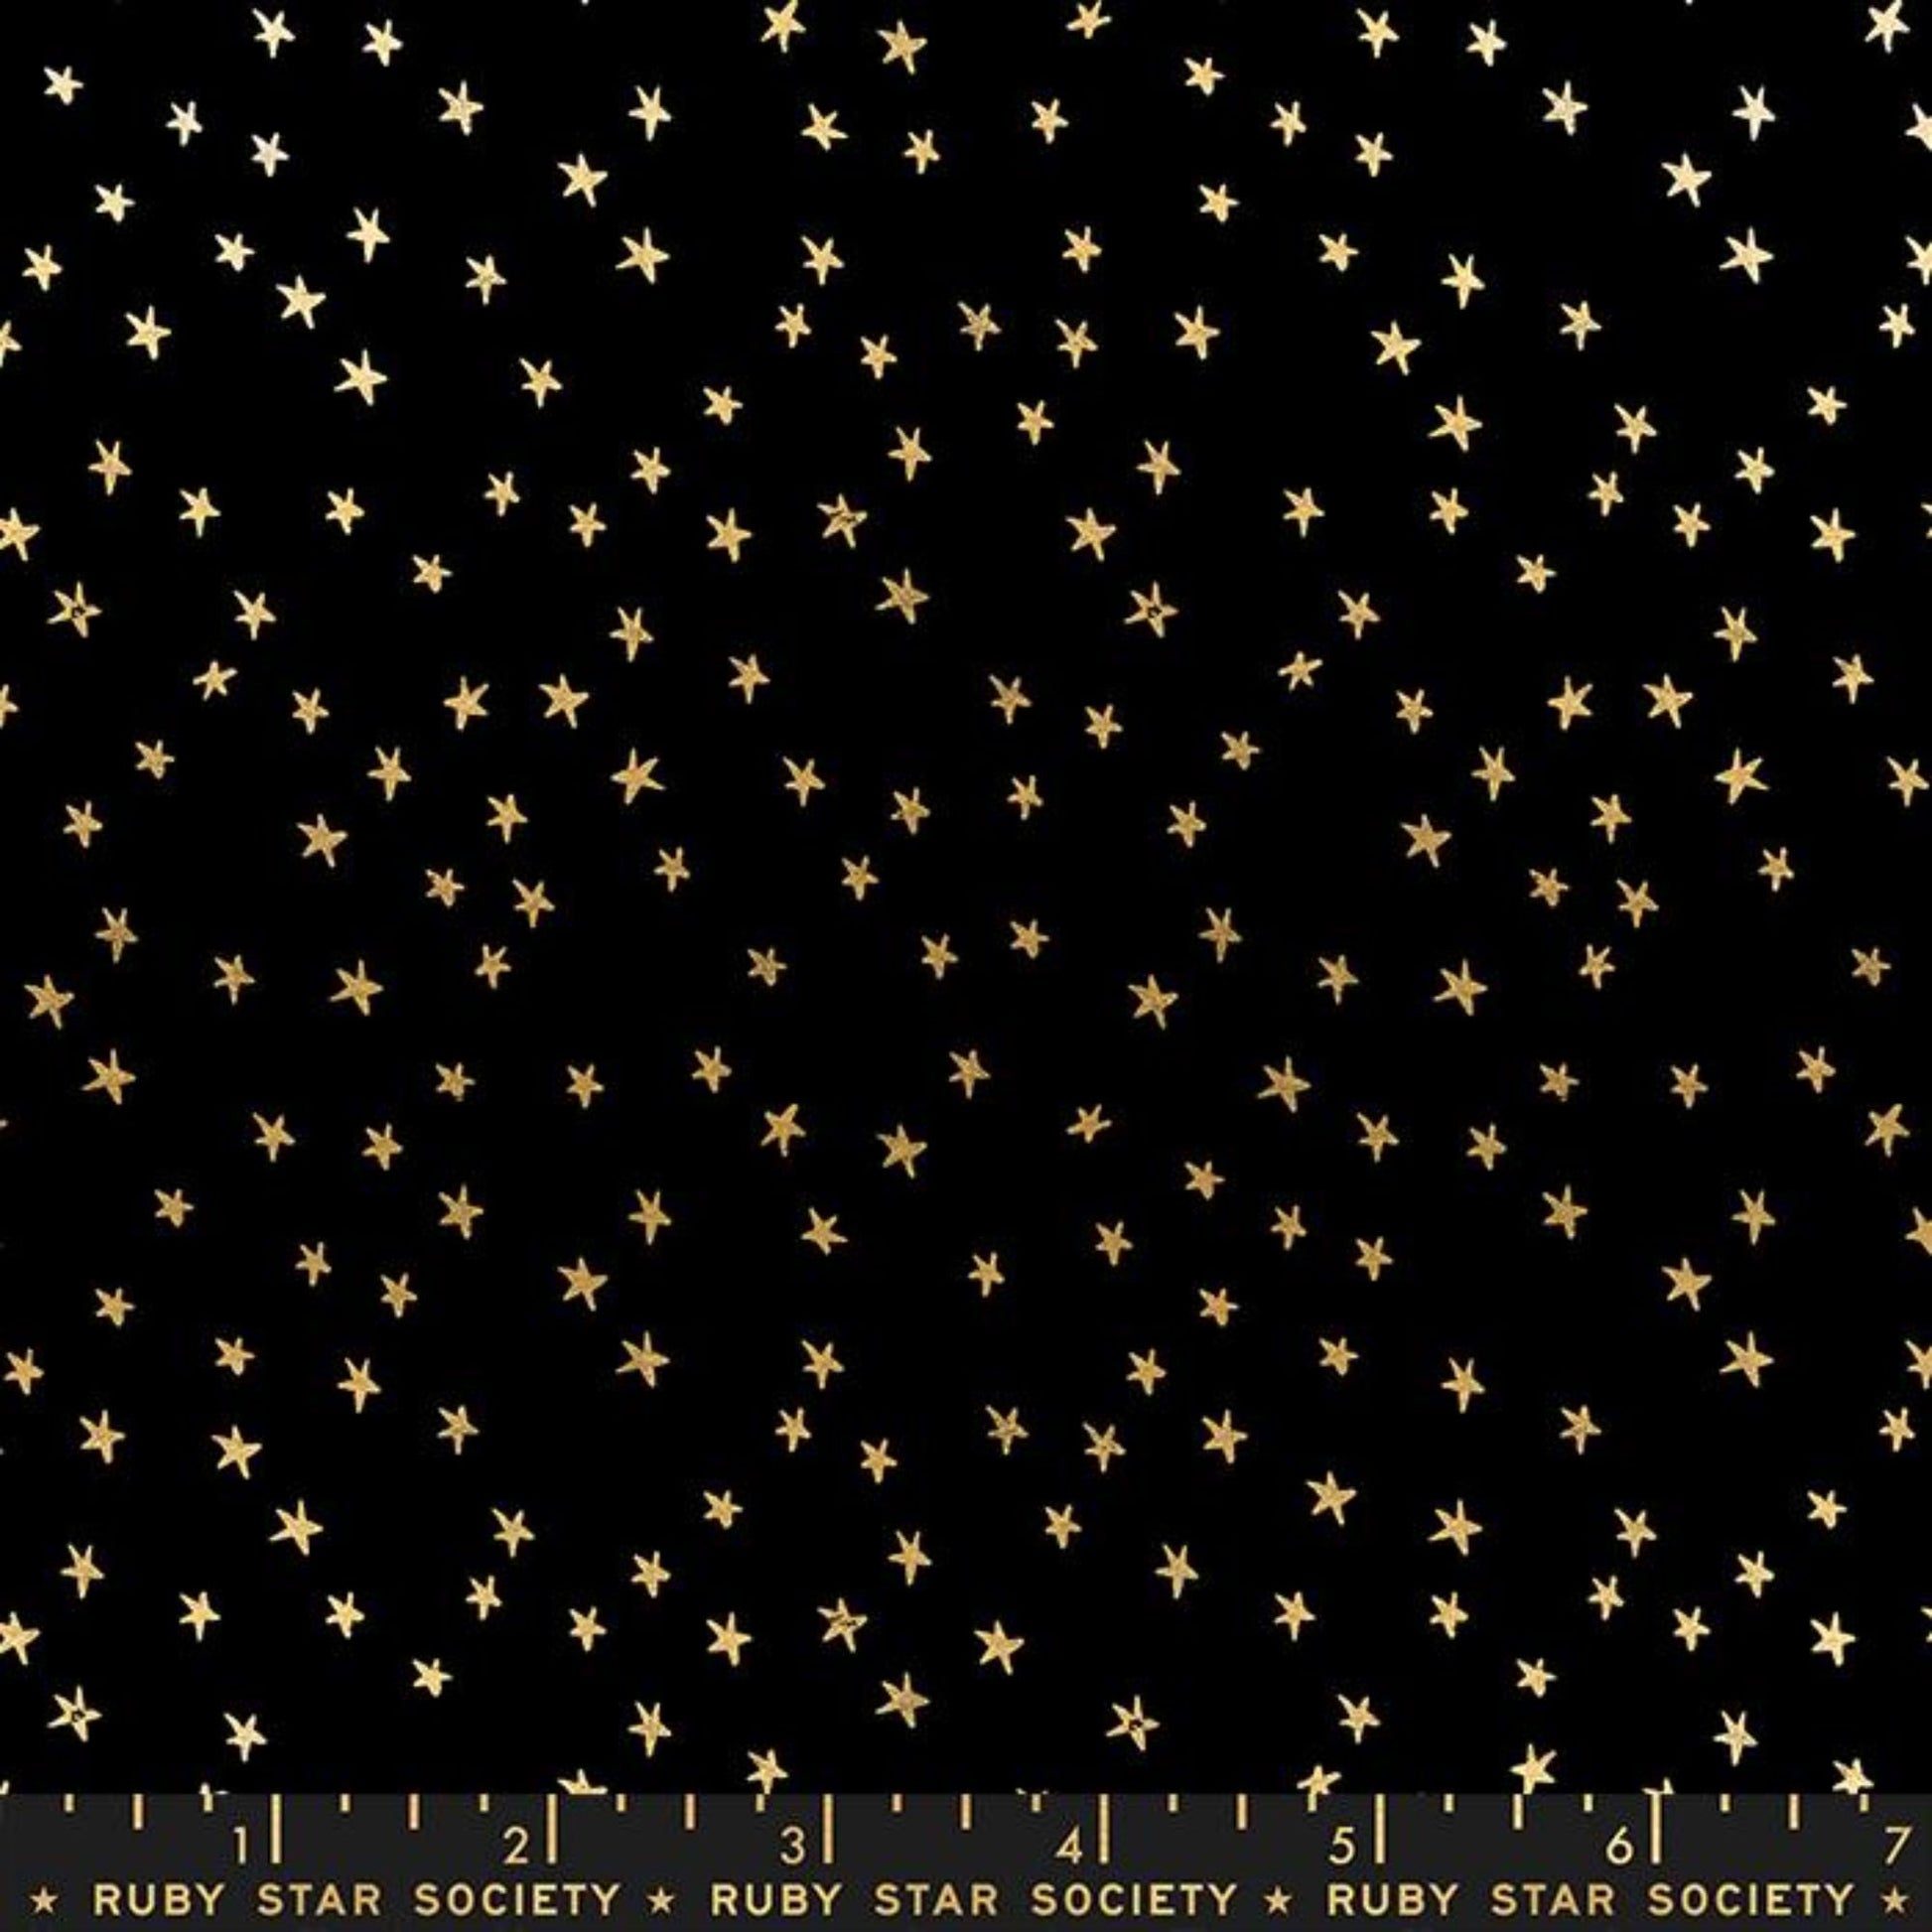 Starry MINI Black Gold METALLIC Starry Alexia Abegg Ruby Star Society Fabric Moda 100% Quilters Cotton RS4110 27M Fabric Fetish